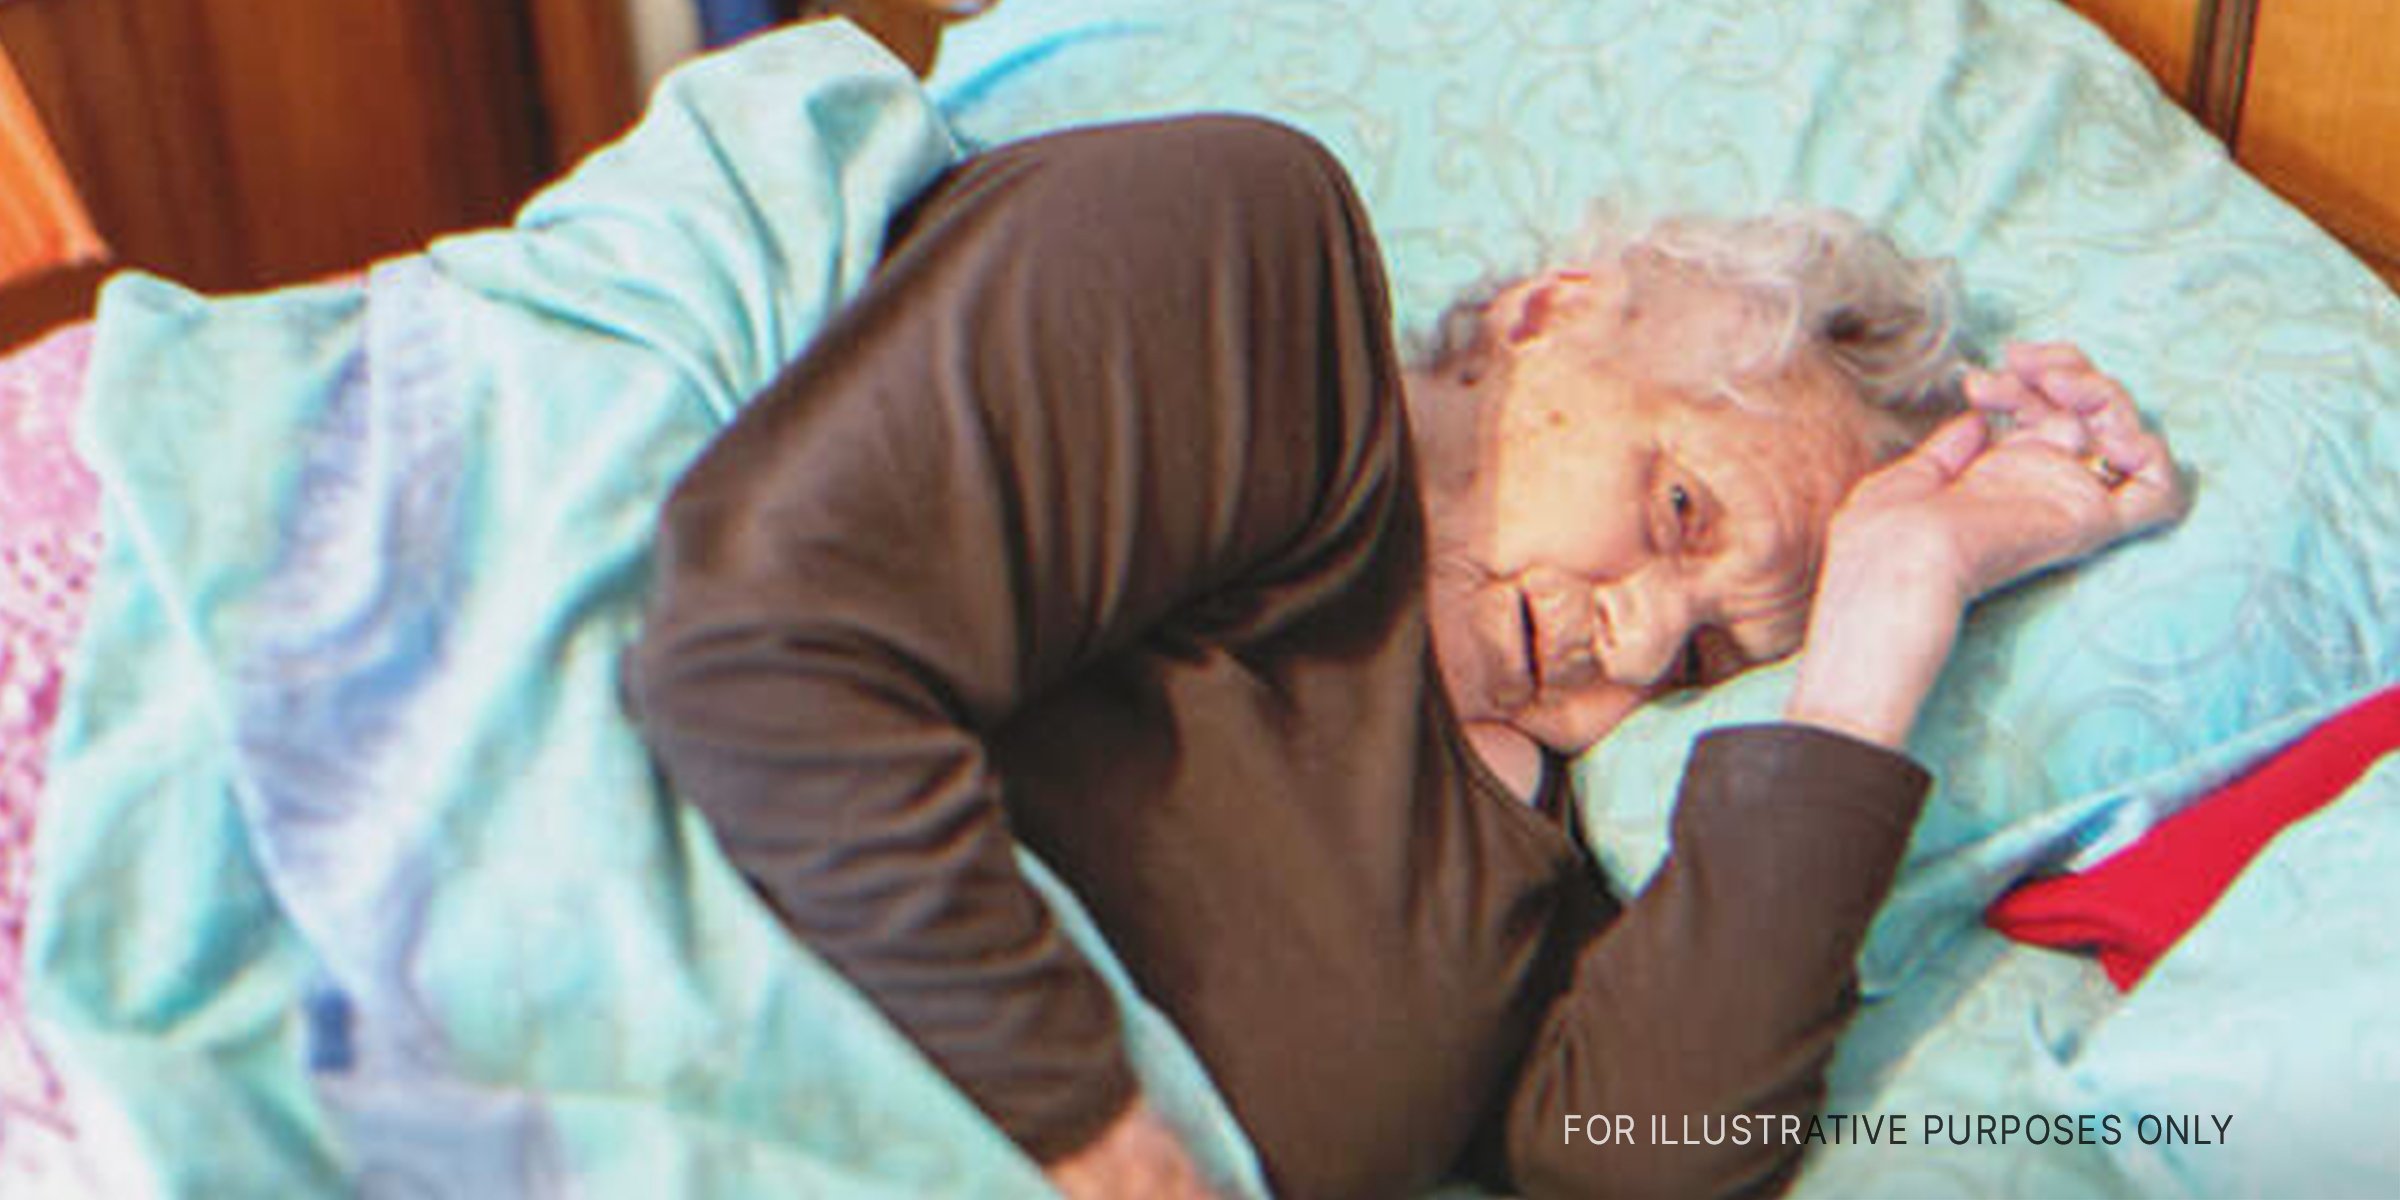 Old woman in bed. | Source: Shutterstock